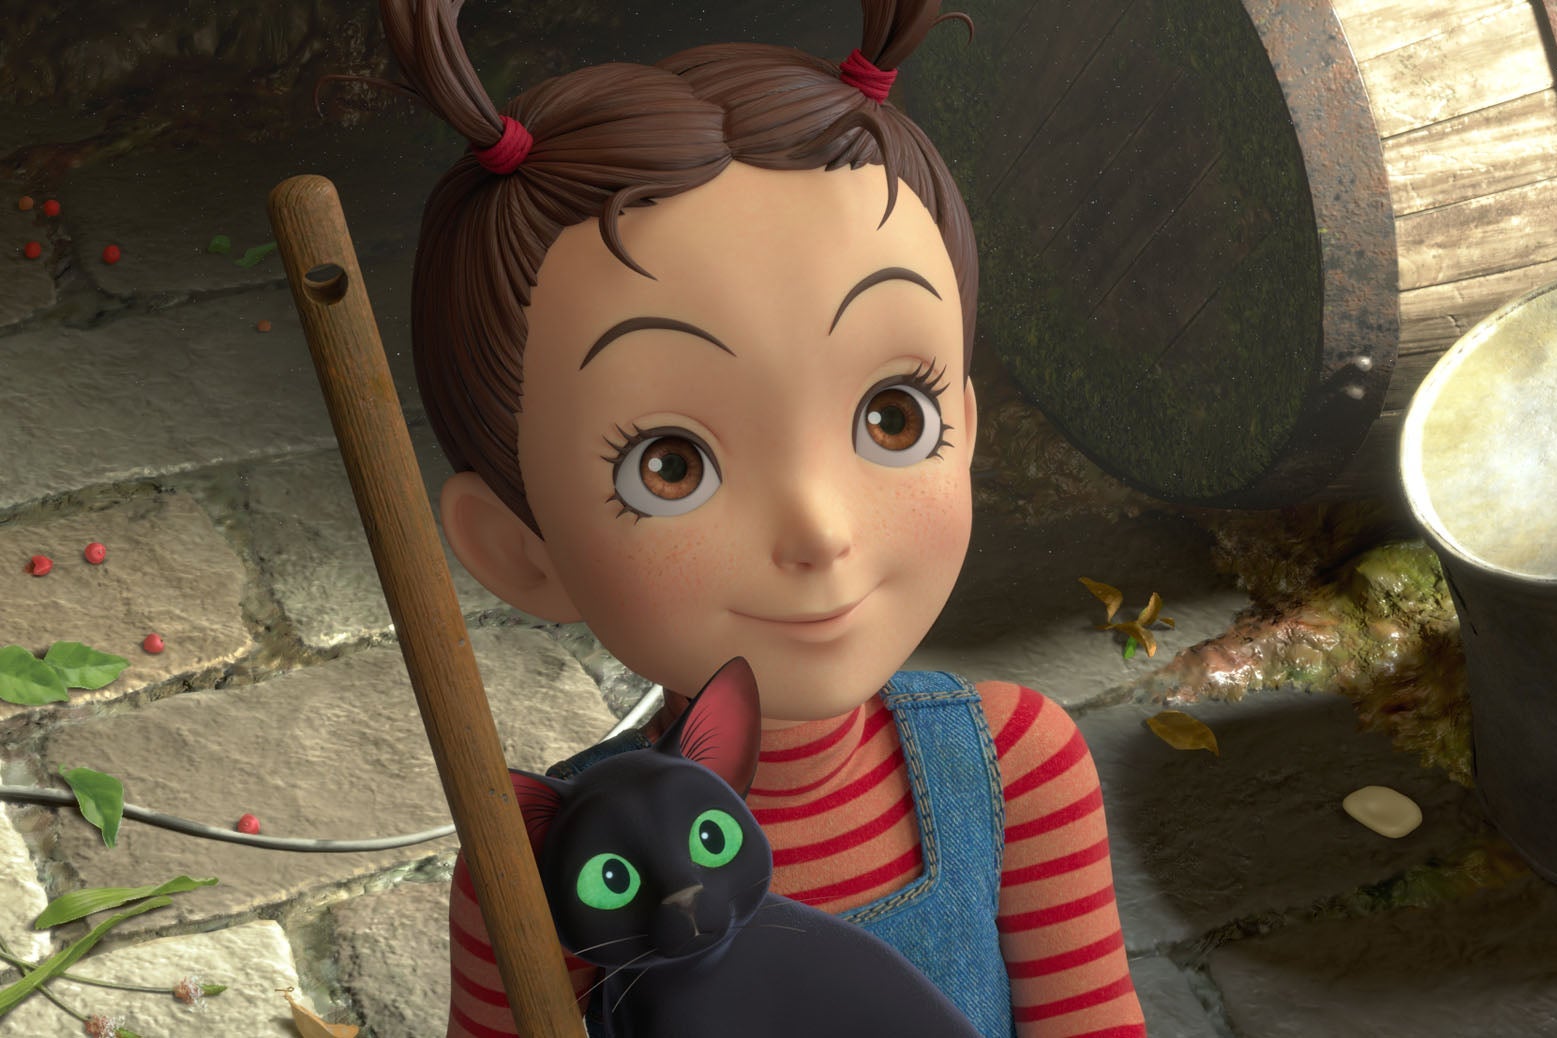 a young girl with pigtails on top of her head holds a black cat